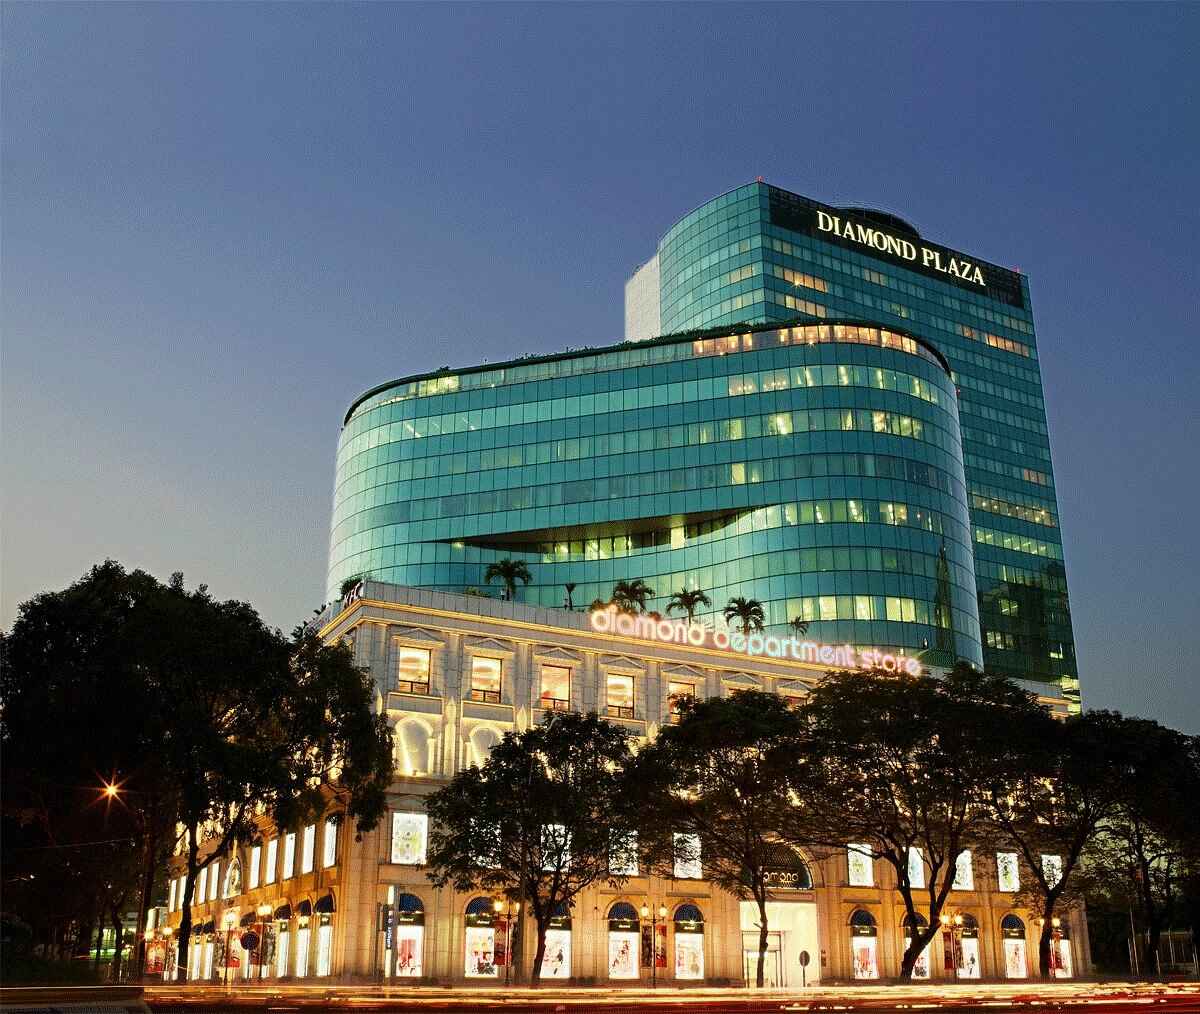 Diamond Plaza is a luxurious shopping center in Ho Chi Minh City